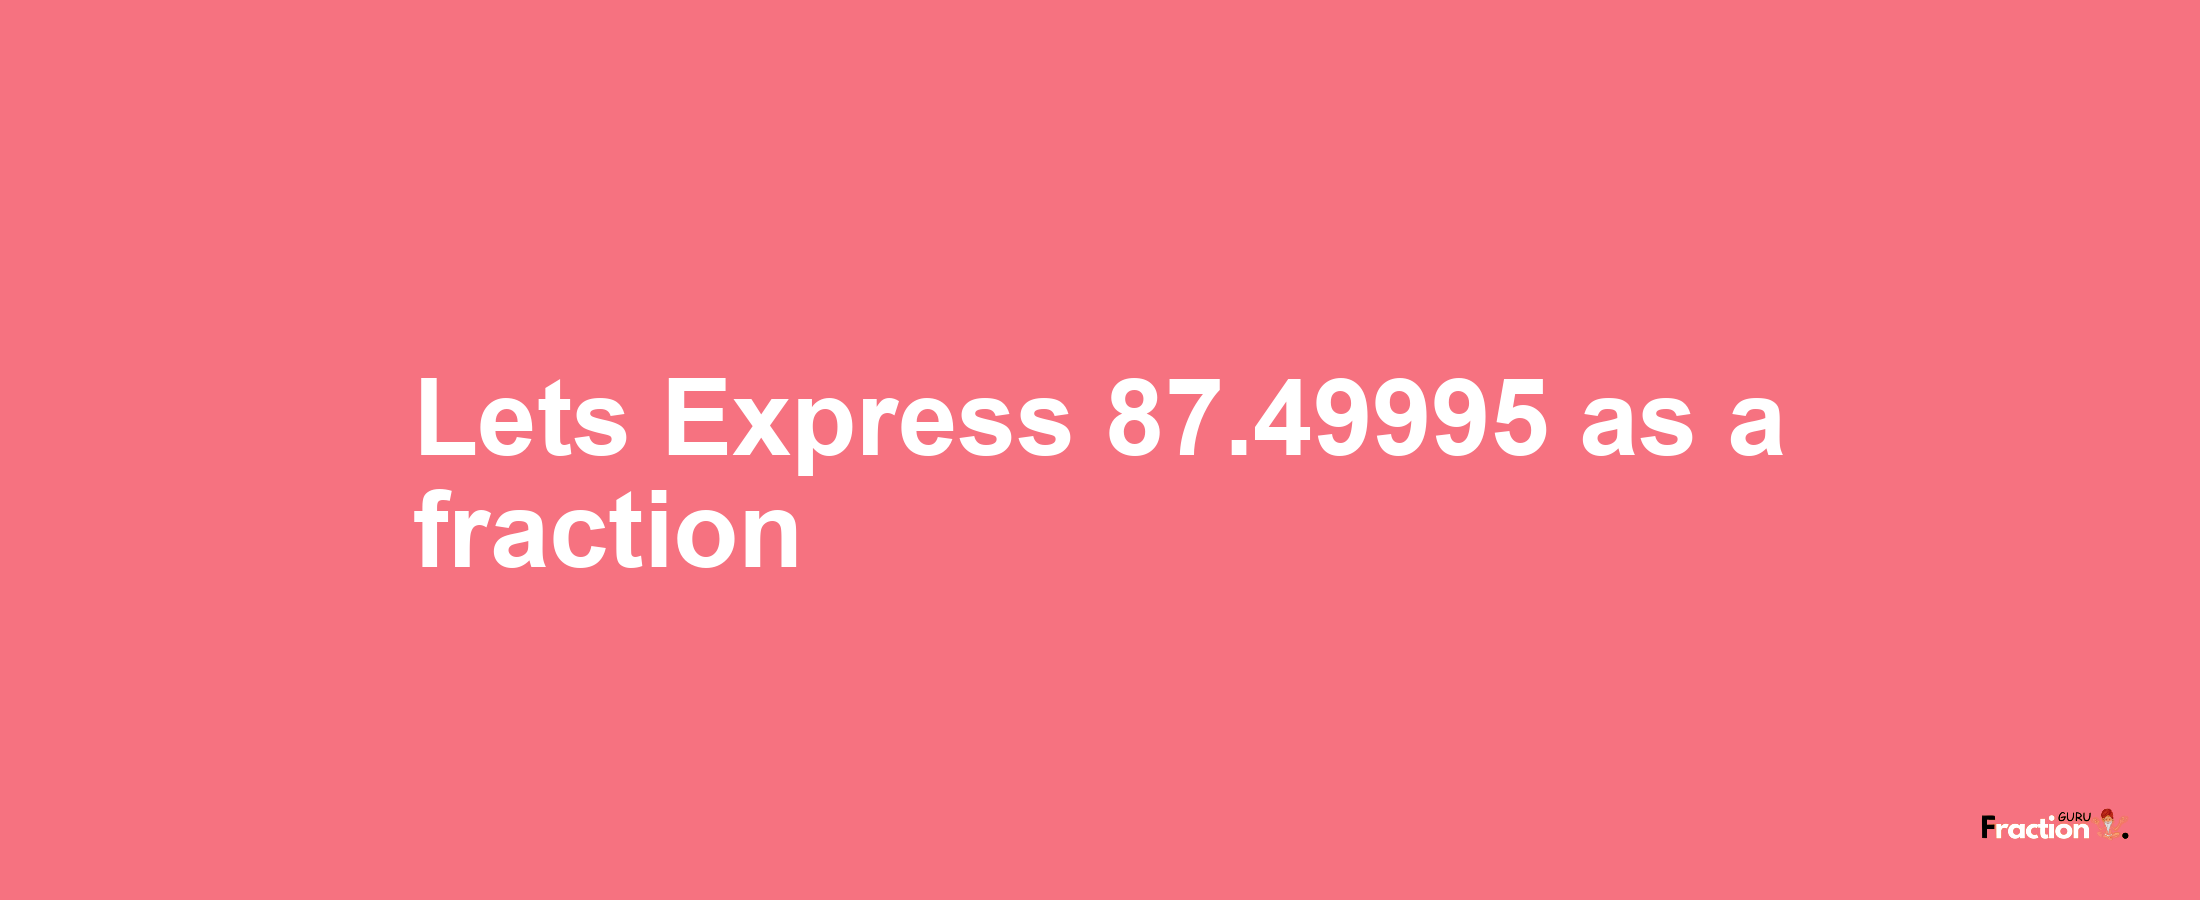 Lets Express 87.49995 as afraction